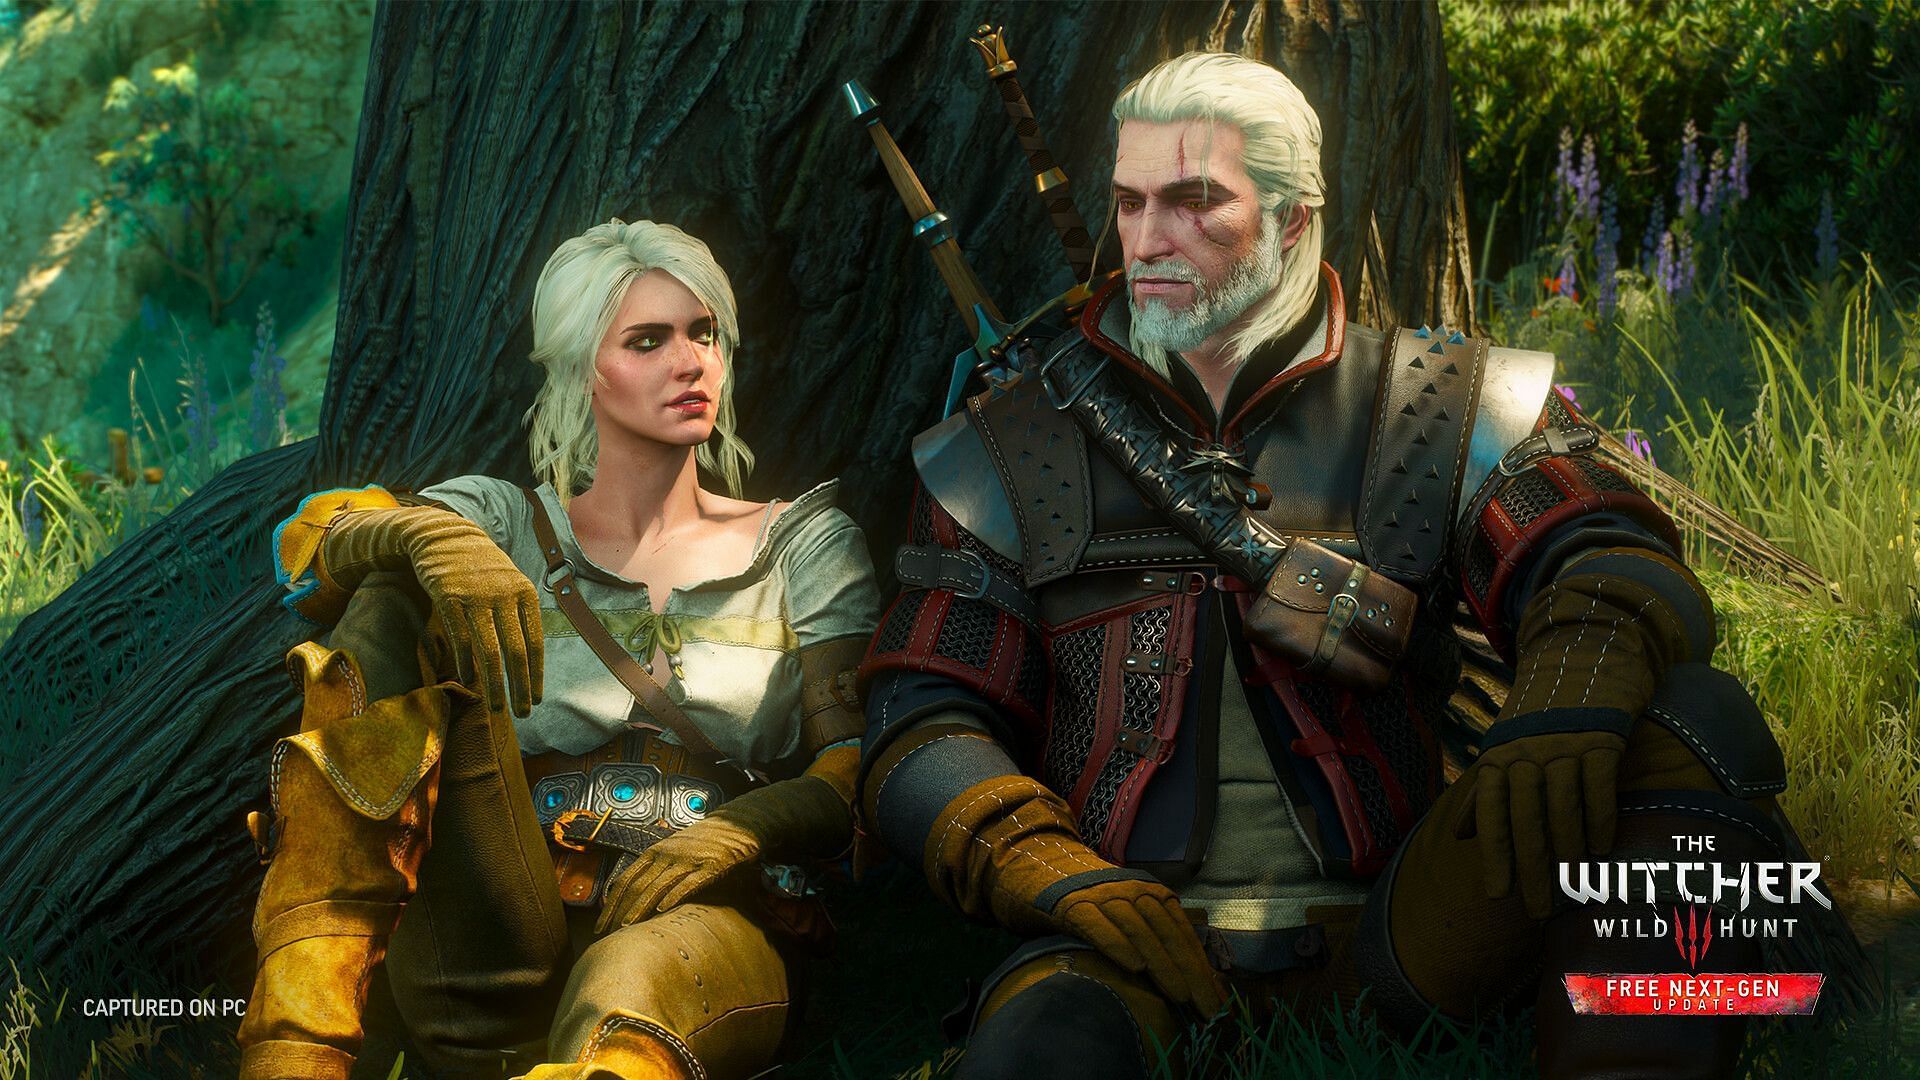 The Witcher 3 next-gen adds a host of graphical improvements over the original release of the game (Image via CD Projekt Red)